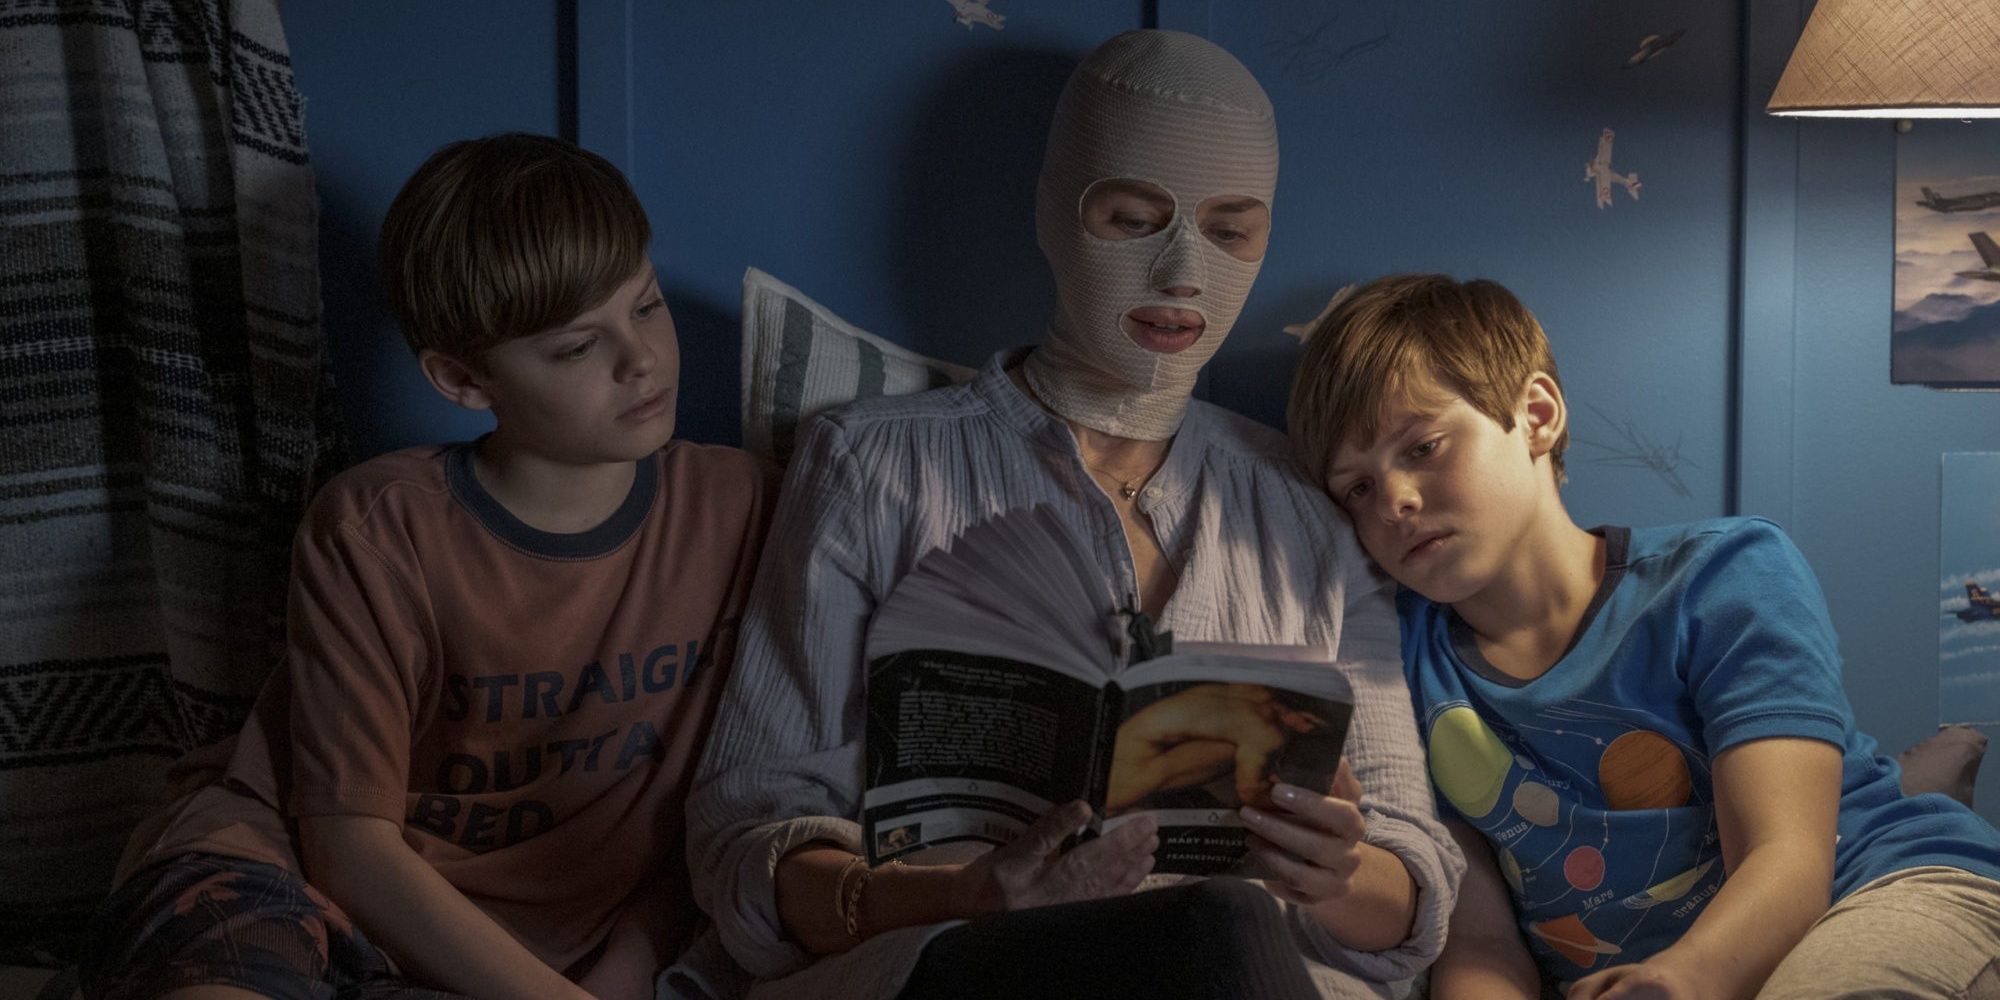 Naomi Watts' character with bandages on her face reading to her boys in bed in 'Goodnight Mommy.'